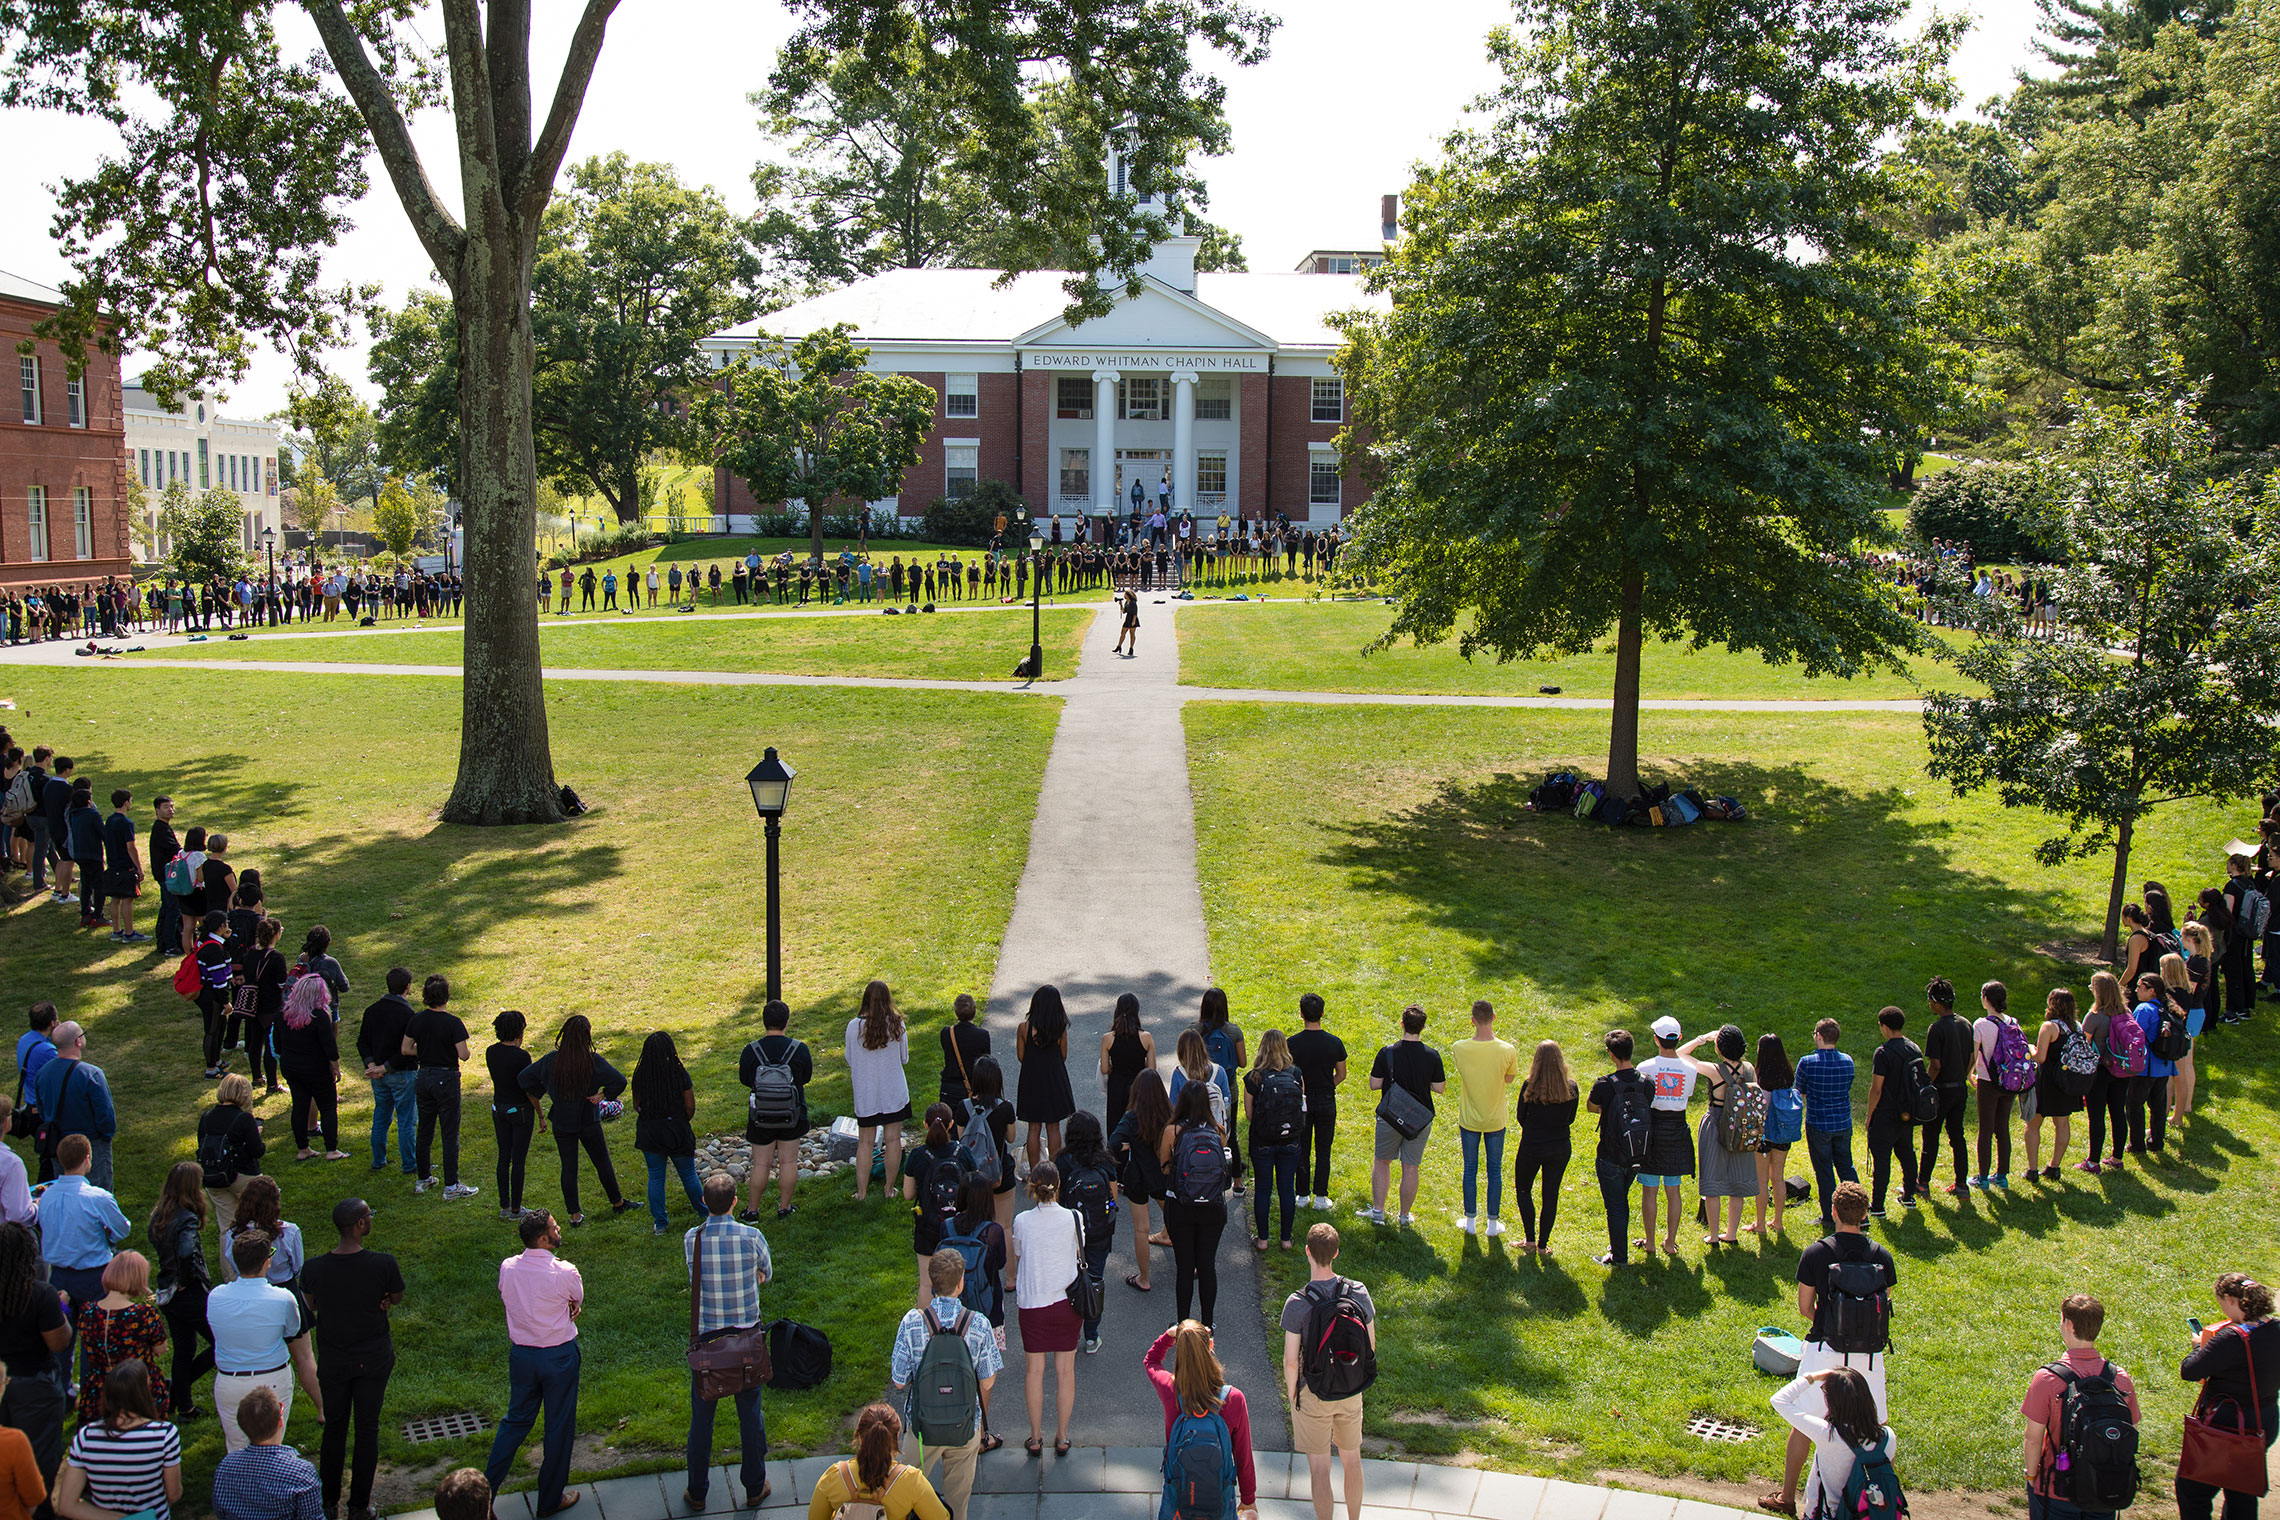 Students gathering on campus.